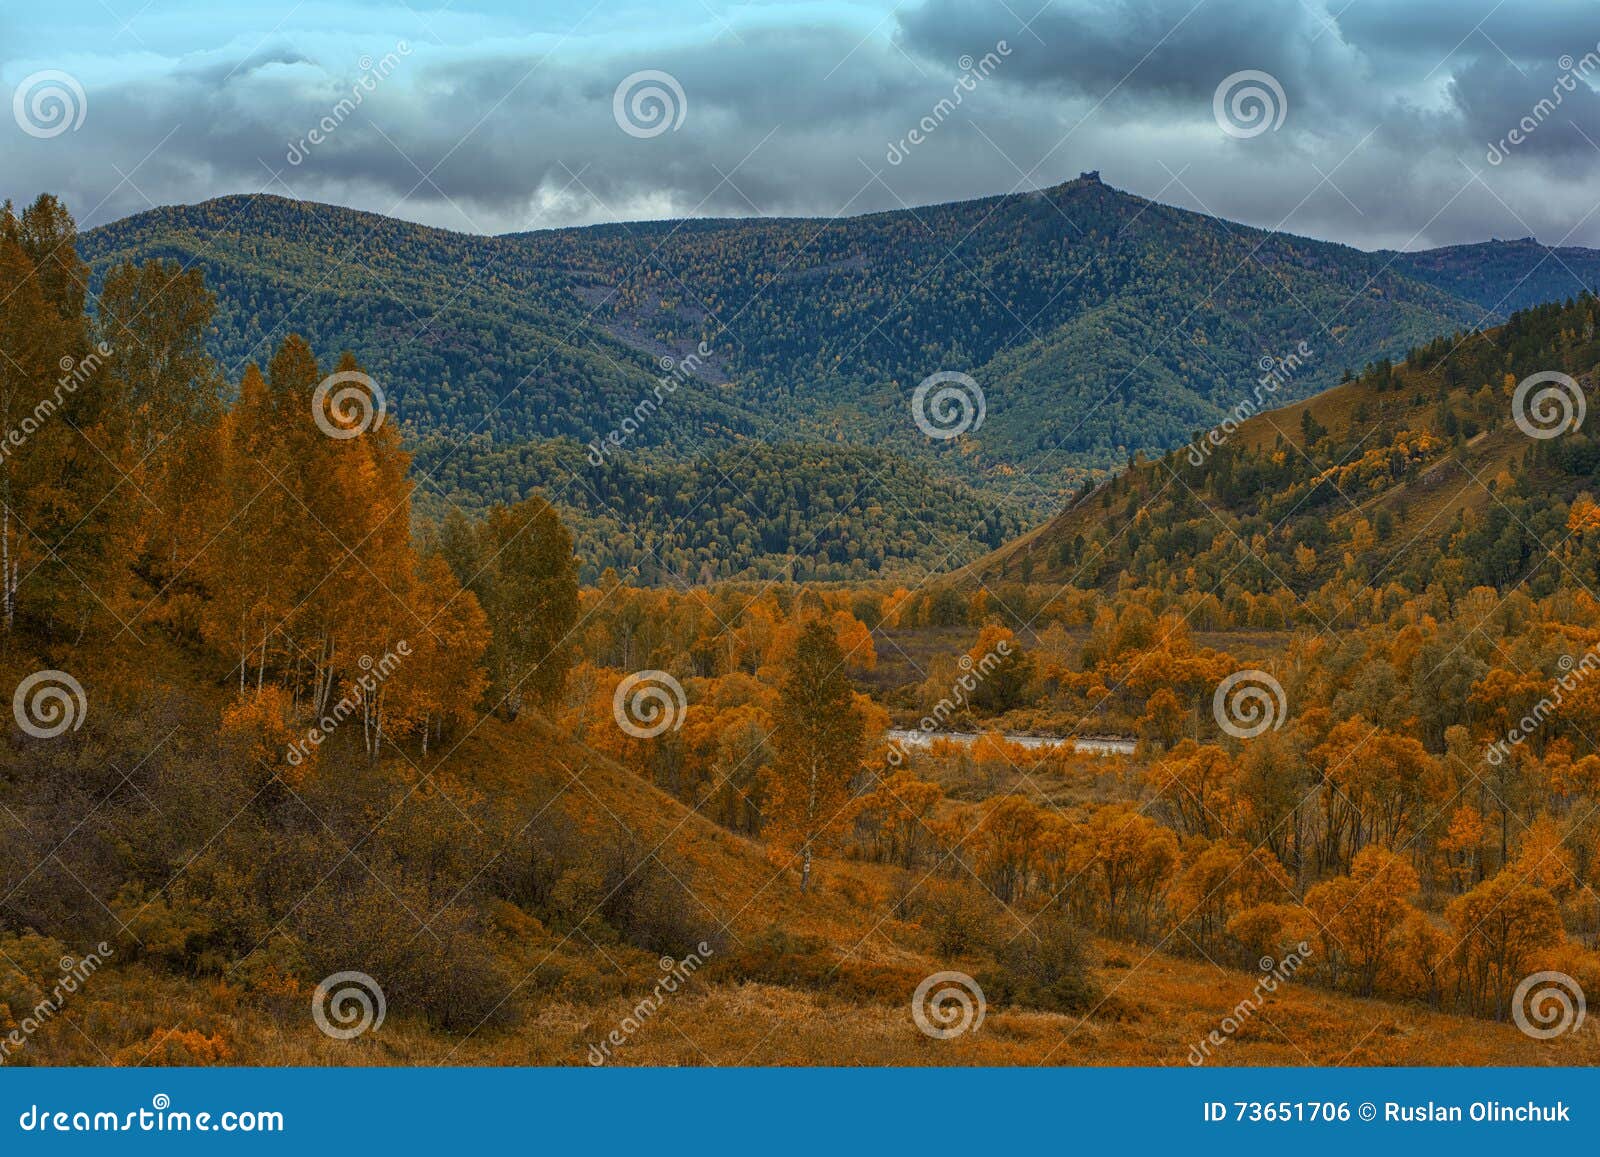 altay mountains in siberia